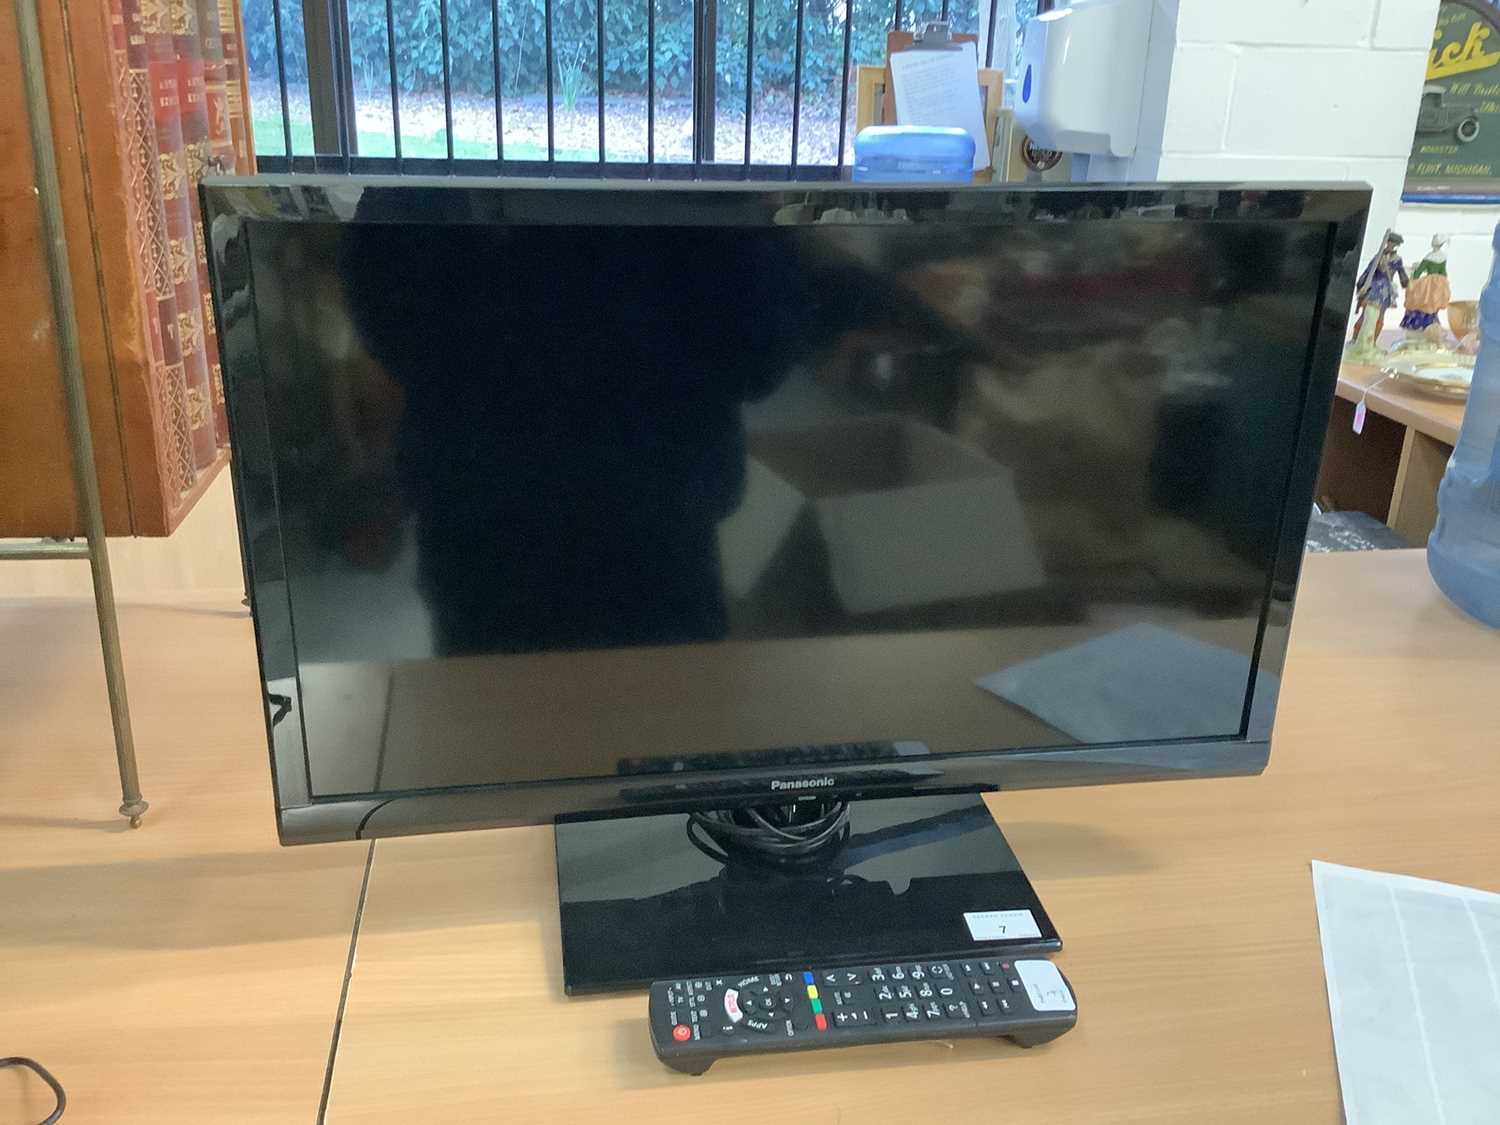 Lot 7 - 24" Panasonic LED TV with remote control